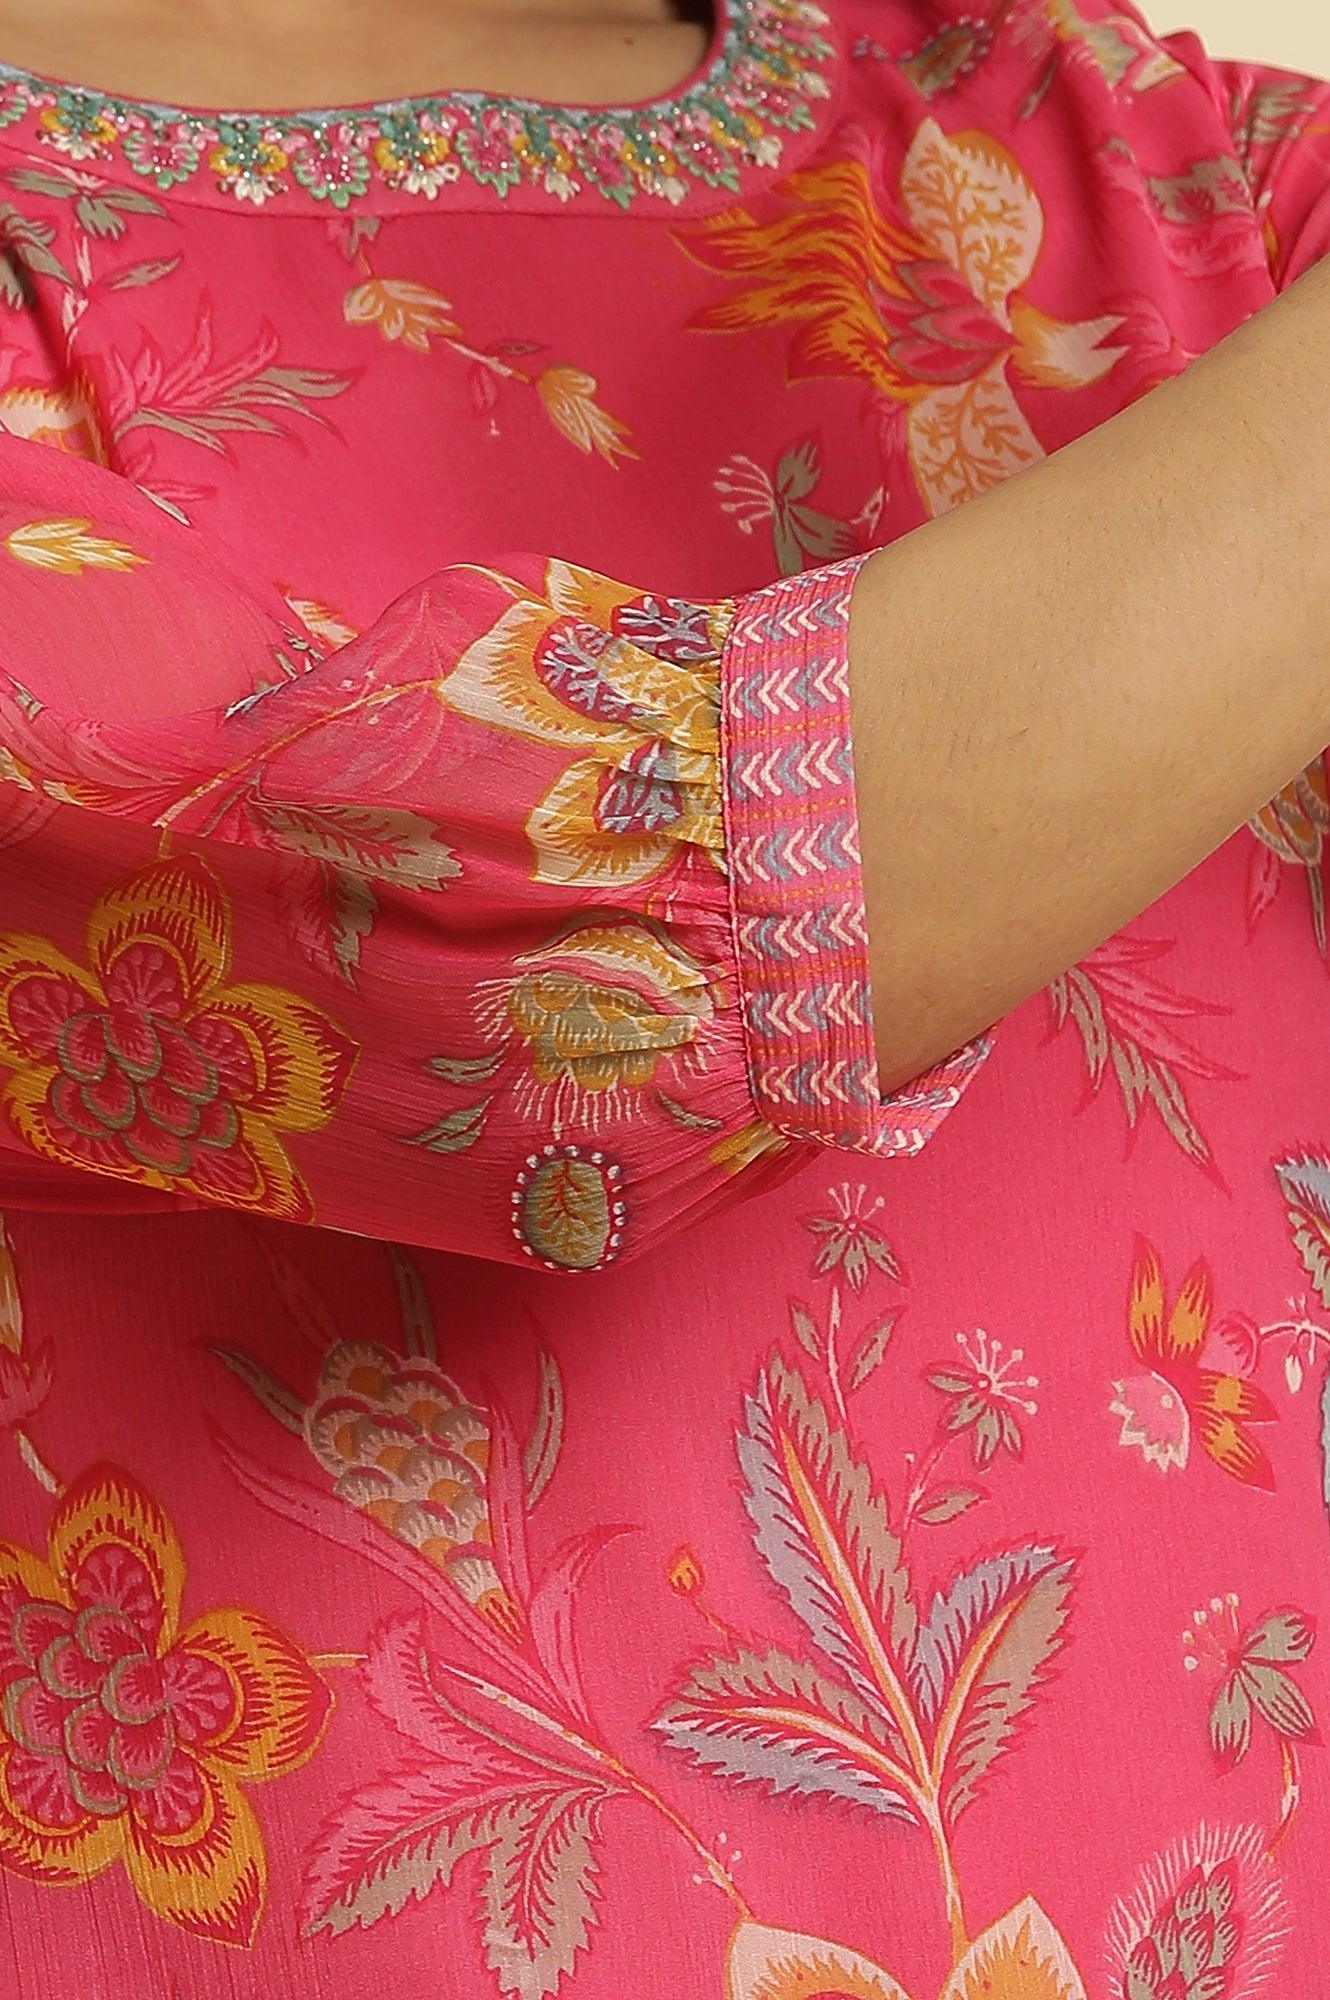 Pink Chiffon Printed Kurta With Multi-Coloured Floral Embroidery - wforwoman